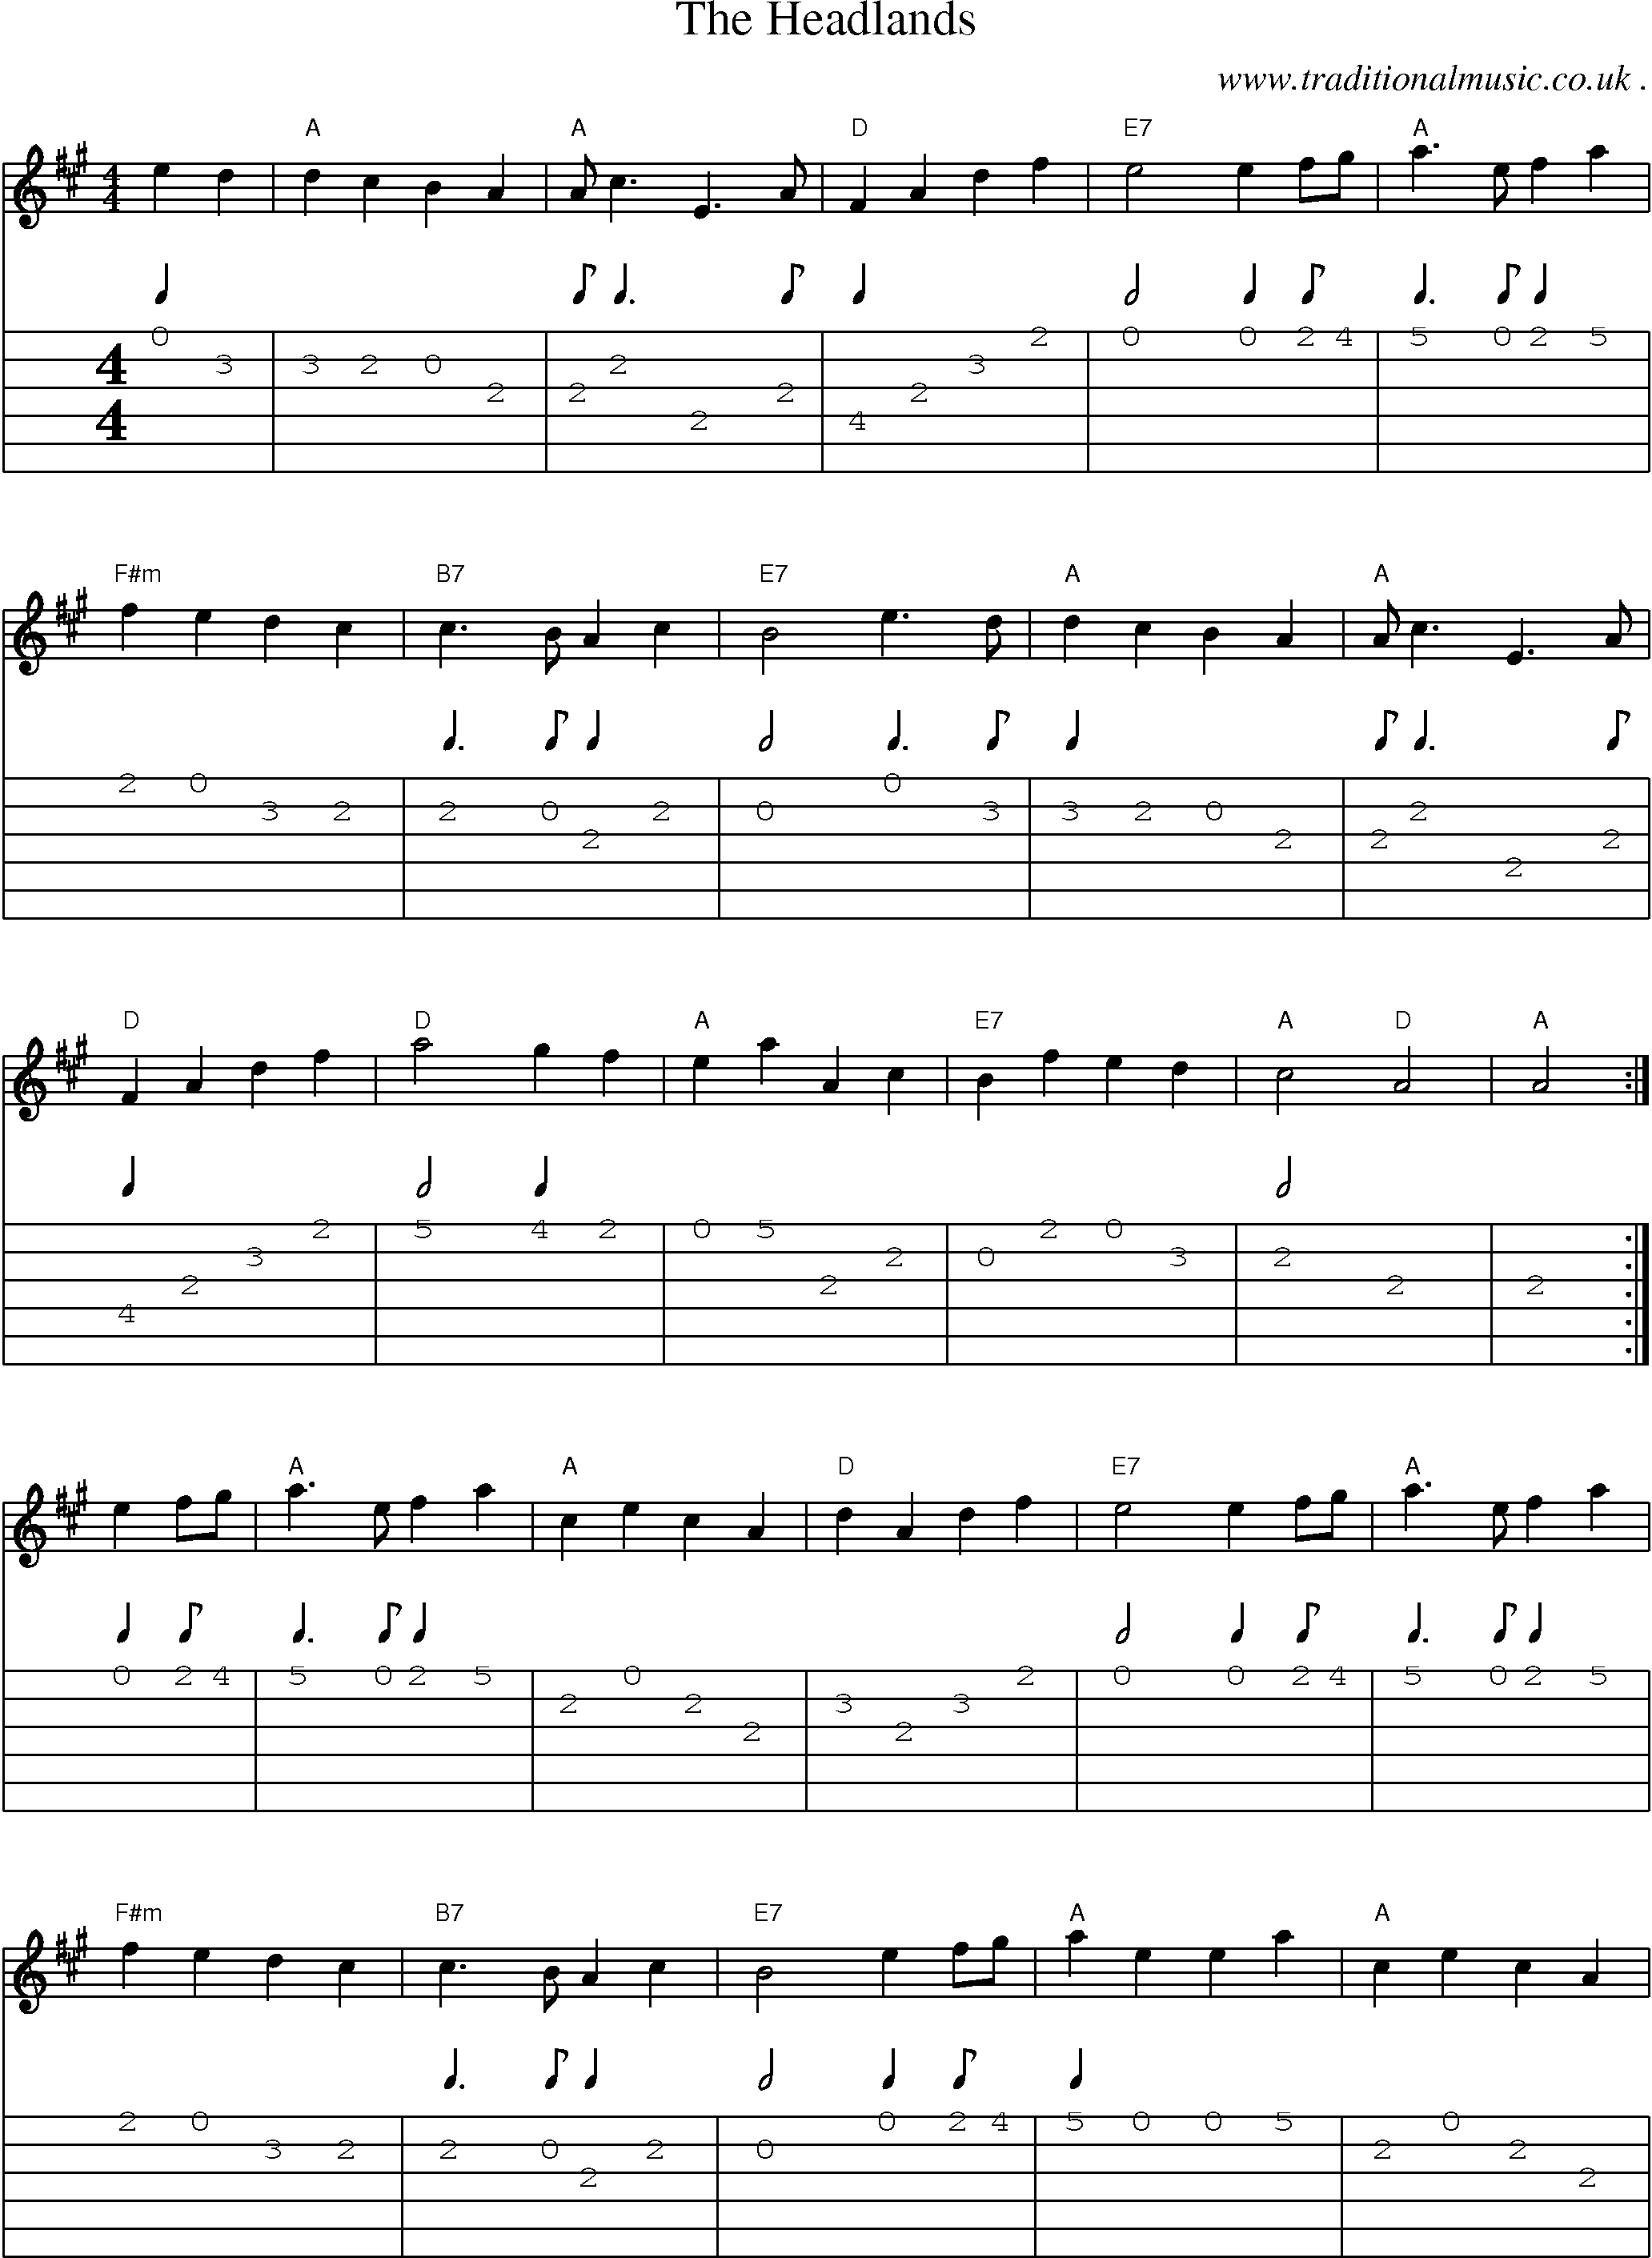 Sheet-Music and Guitar Tabs for The Headlands